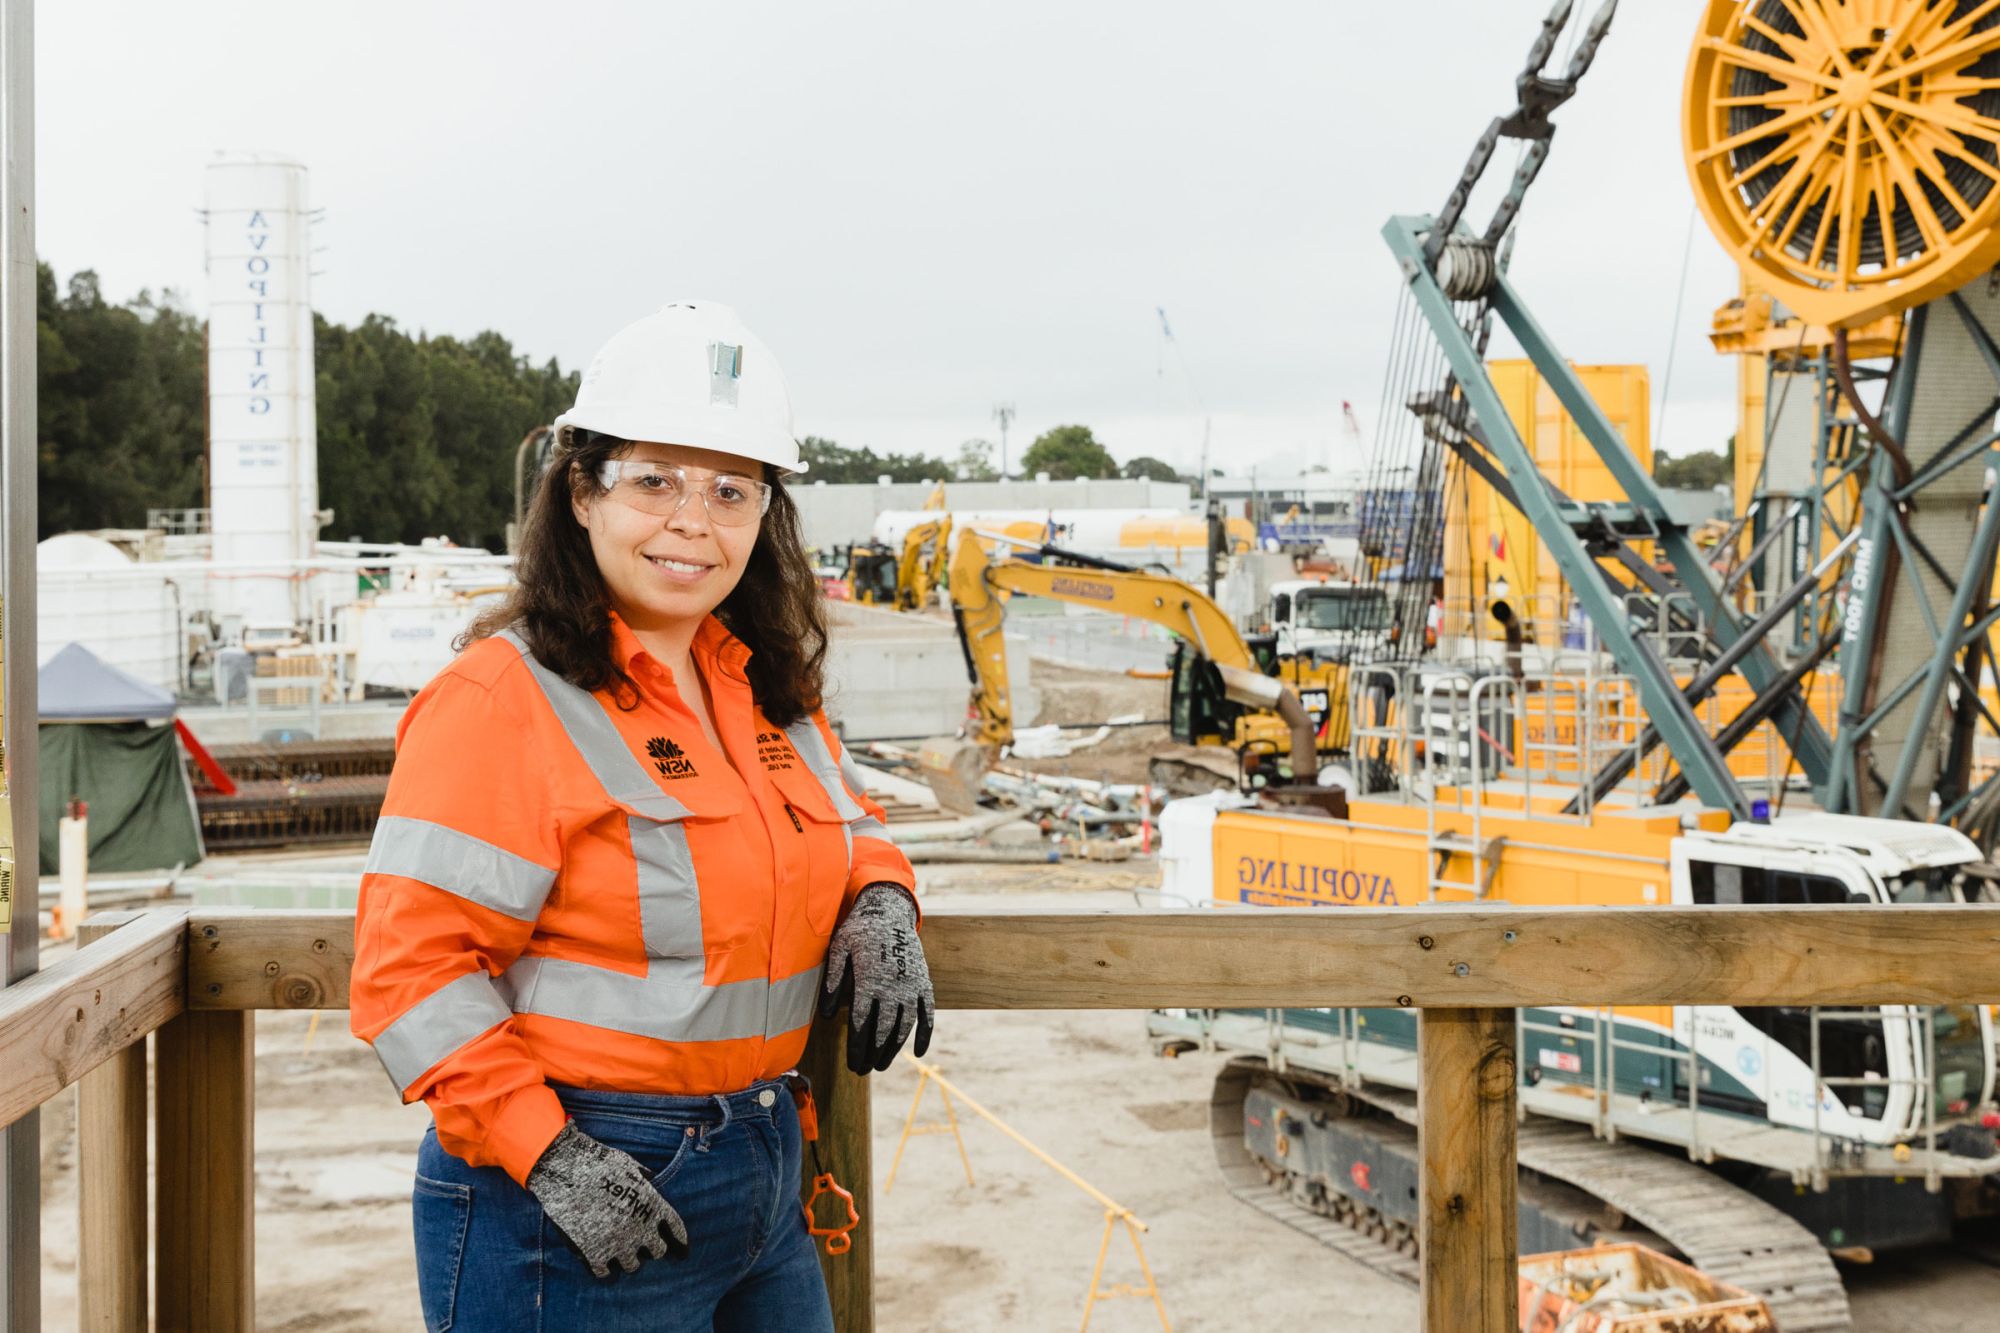 Nagham is standing on site wearing hi vis and a hard hat. She is smiling at the camera and has machinery behind her